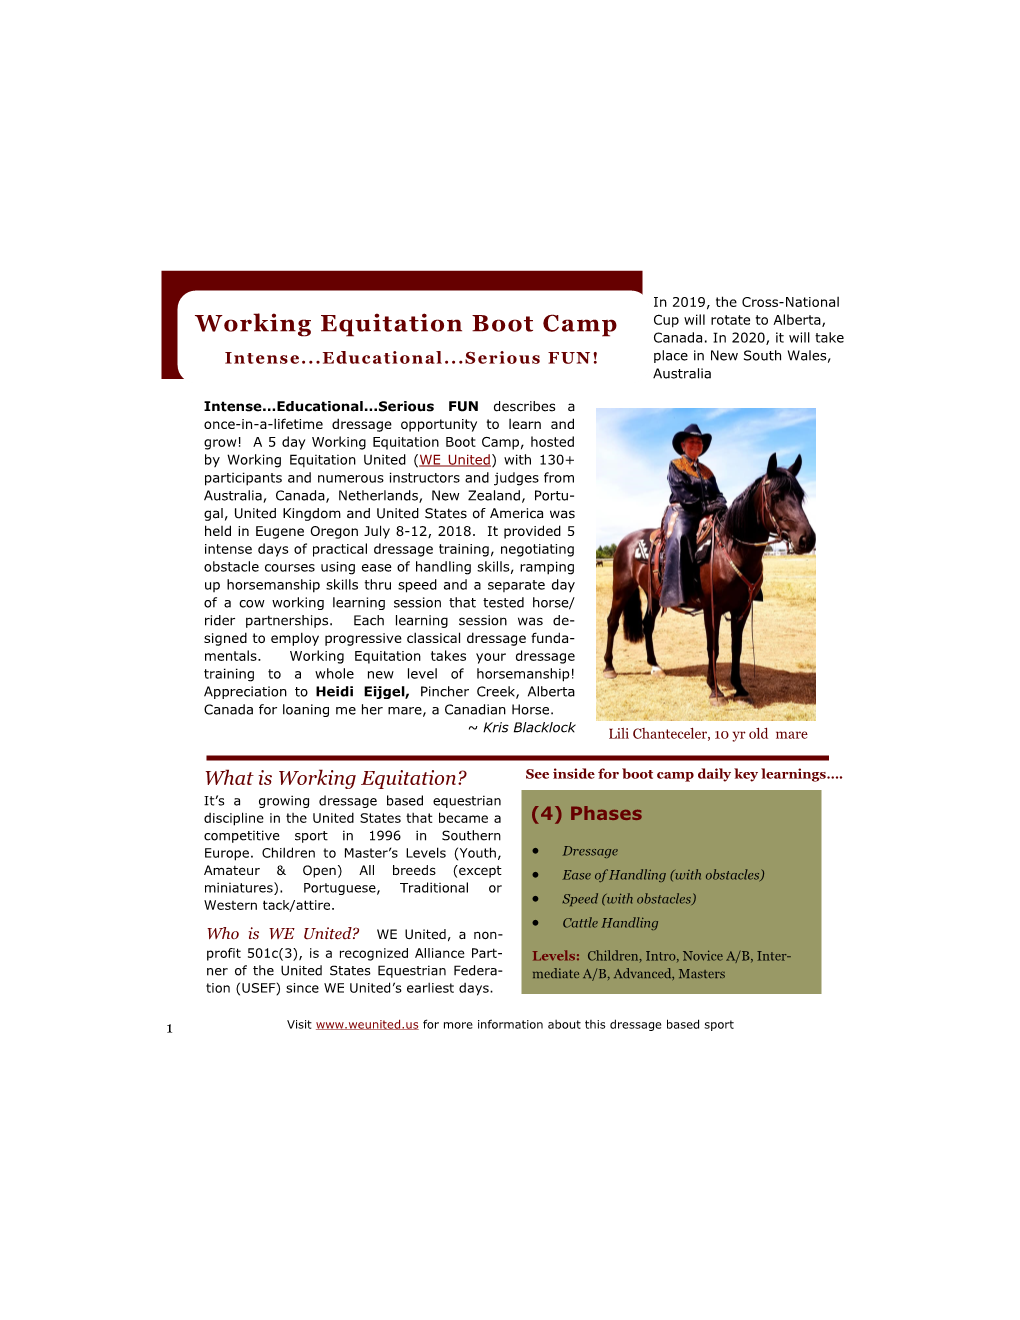 Working Equitation Boot Camp Cup Will Rotate to Alberta, Canada